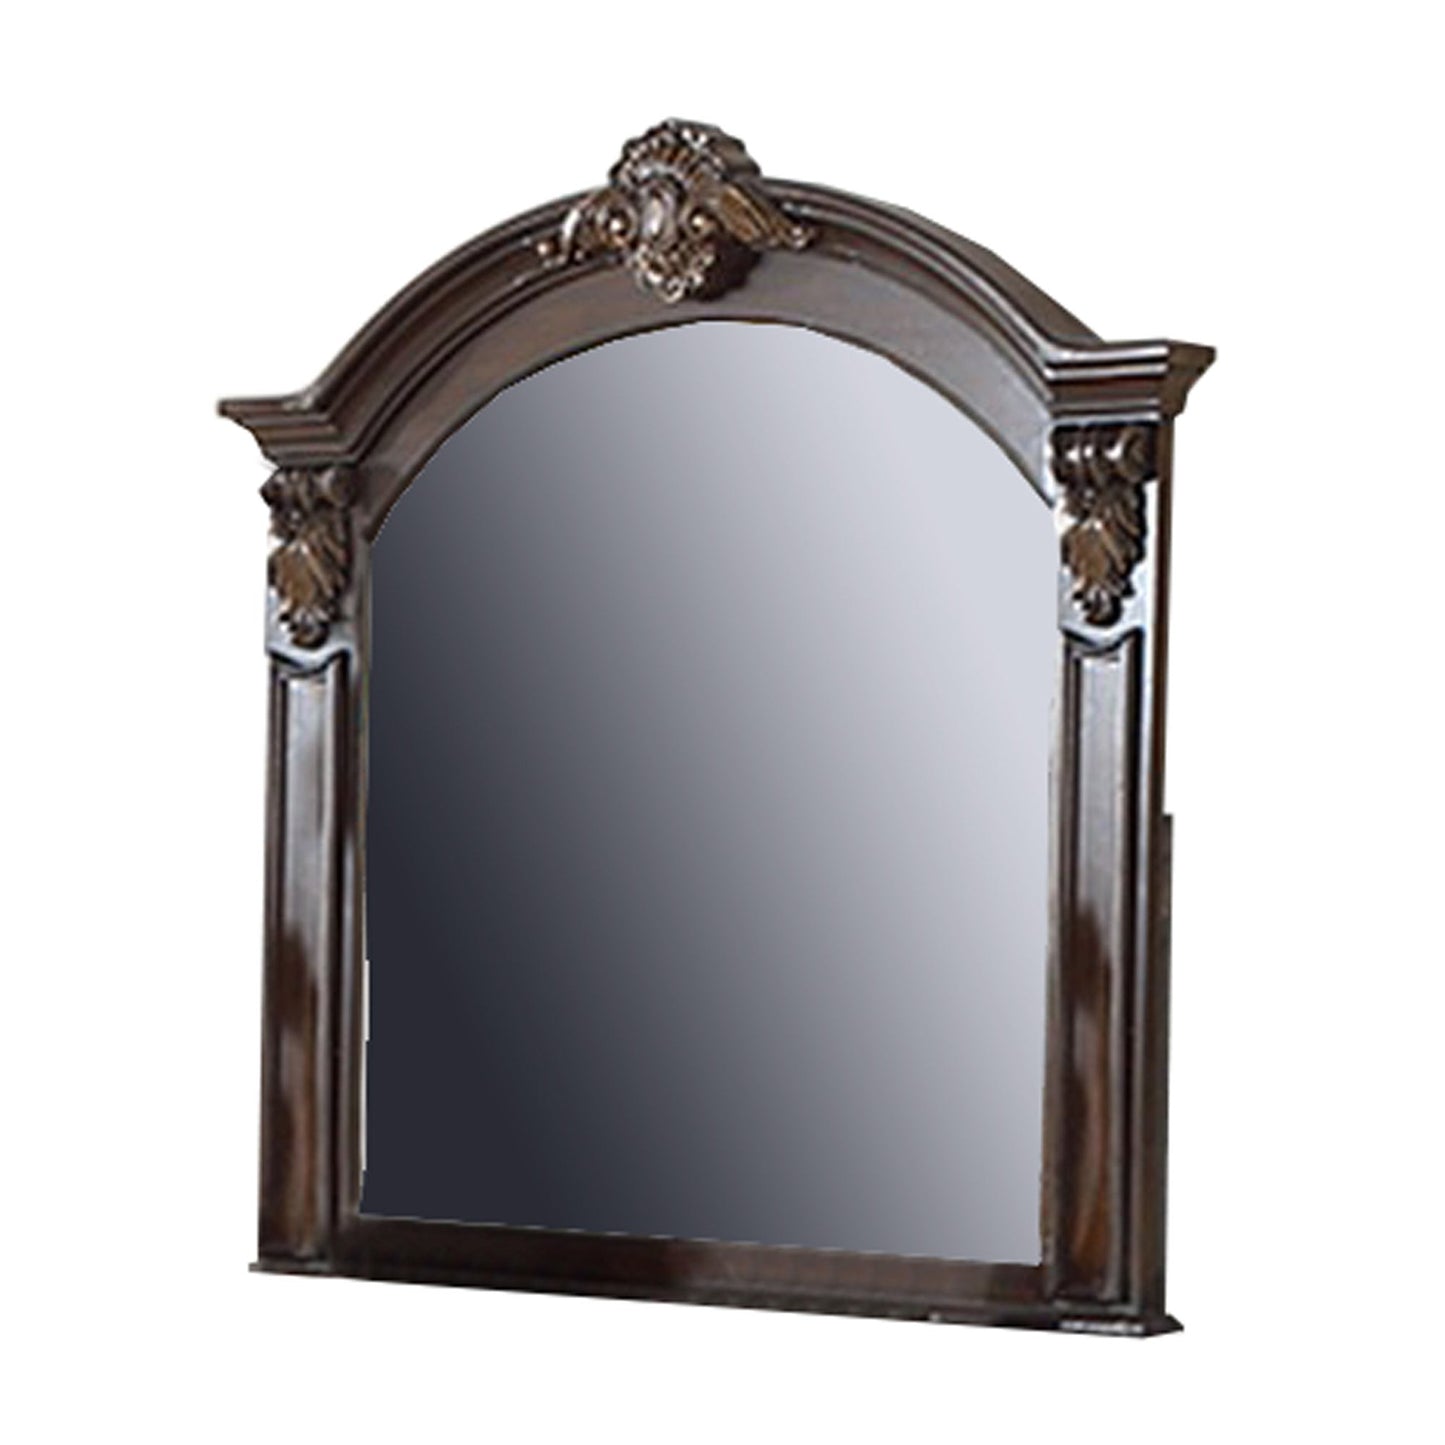 Benzara Brown Scalloped Crown Top Wooden Frame Wall Mirror With Molded Details